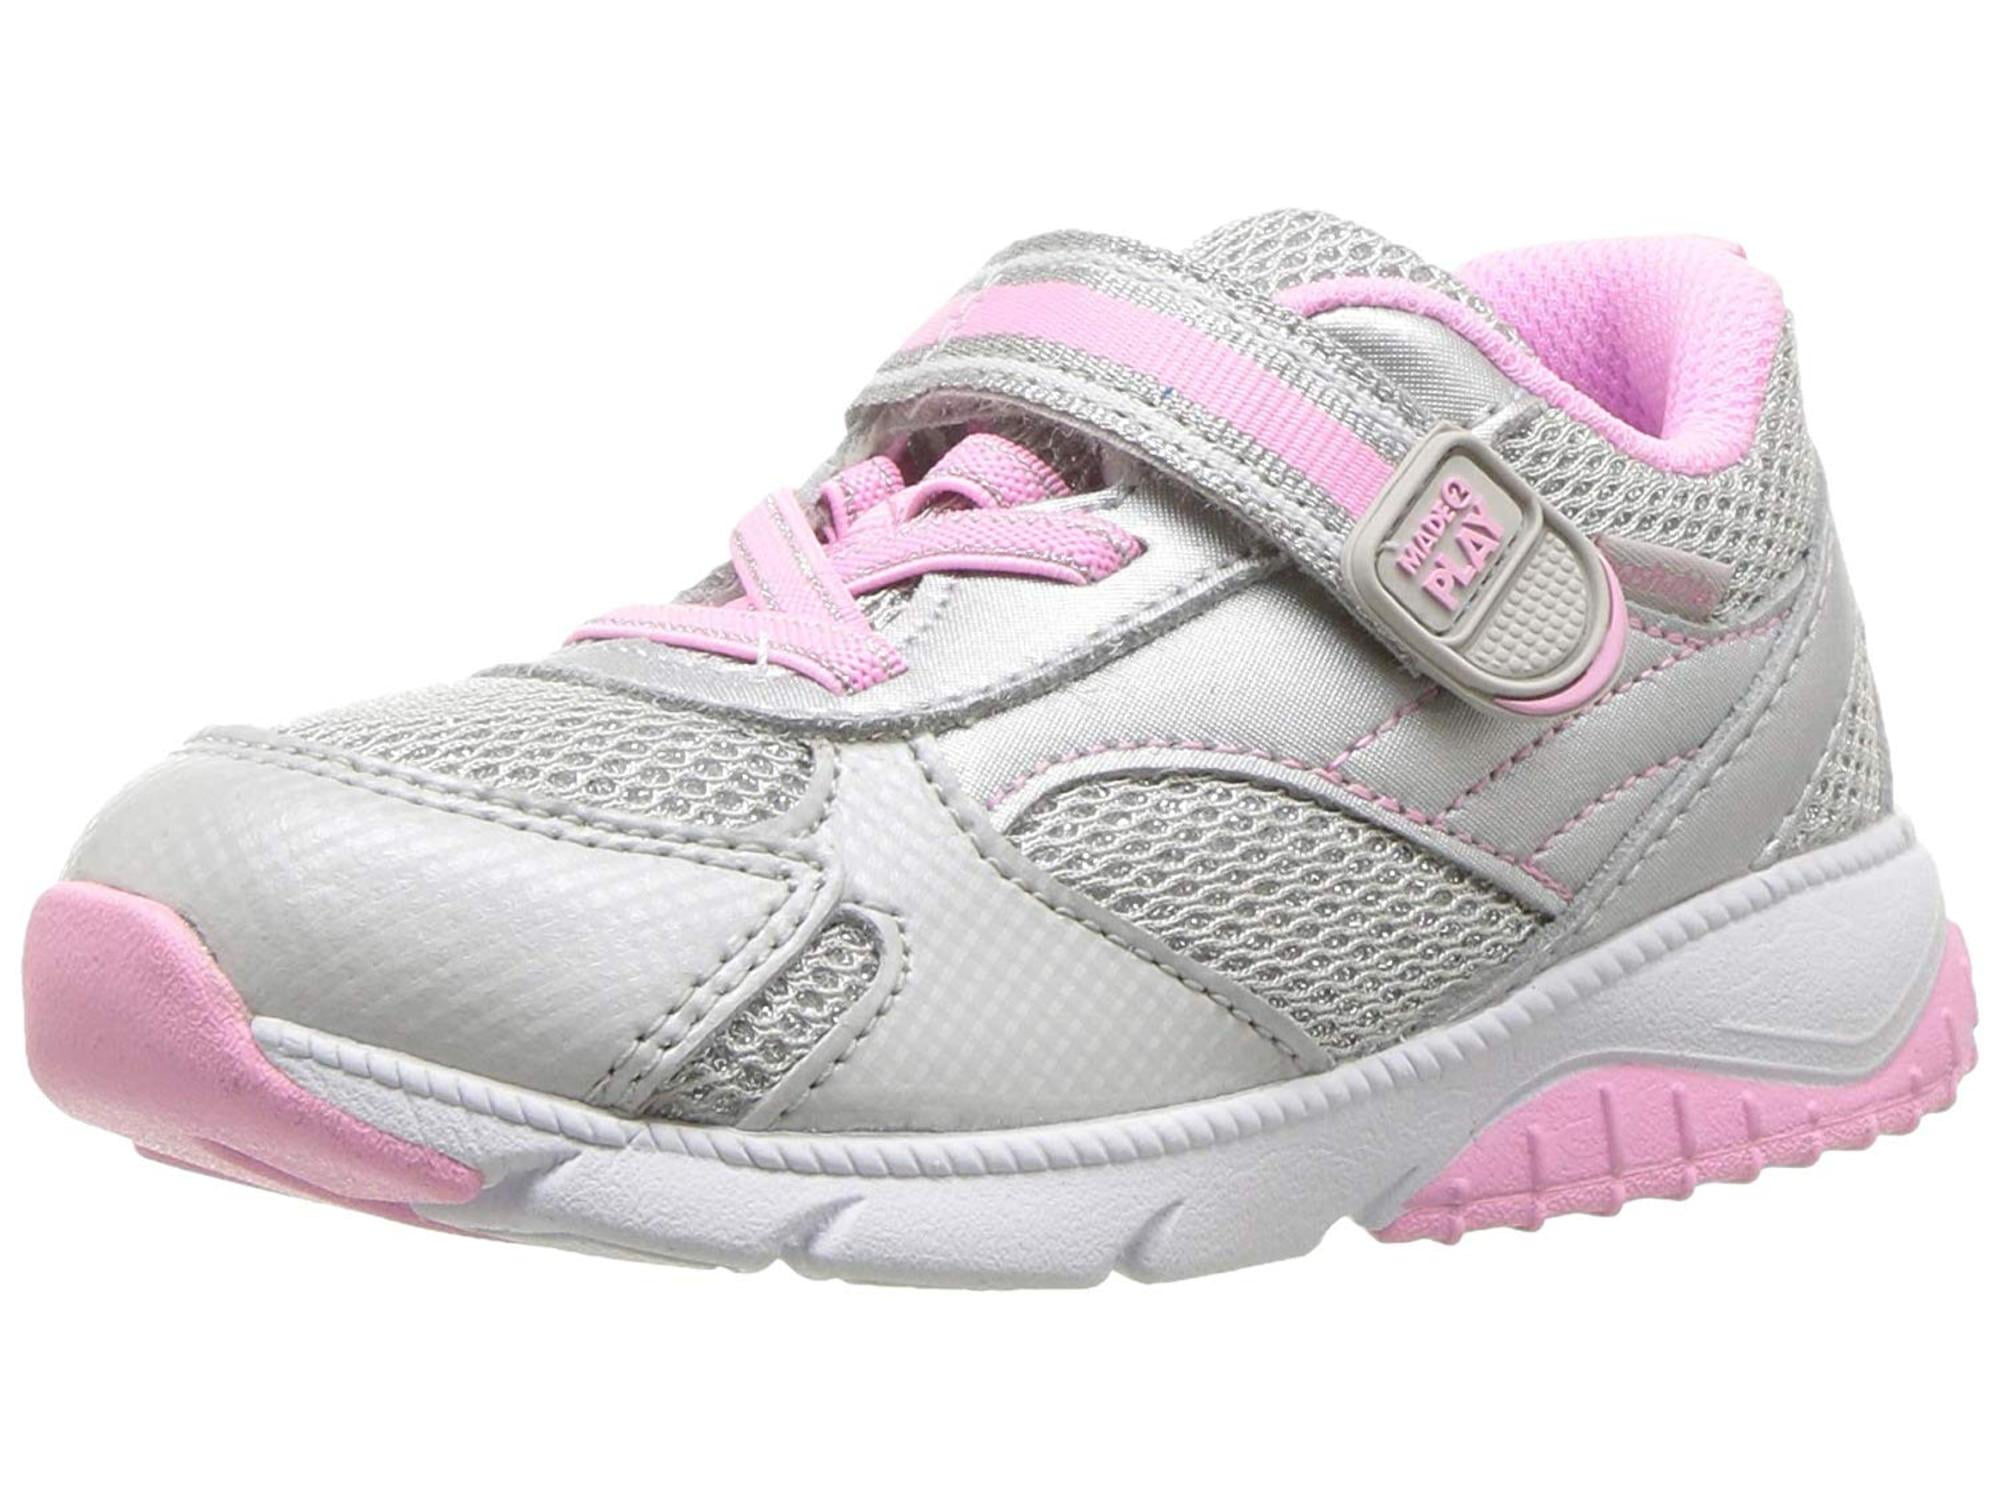 stride rite girls shoes